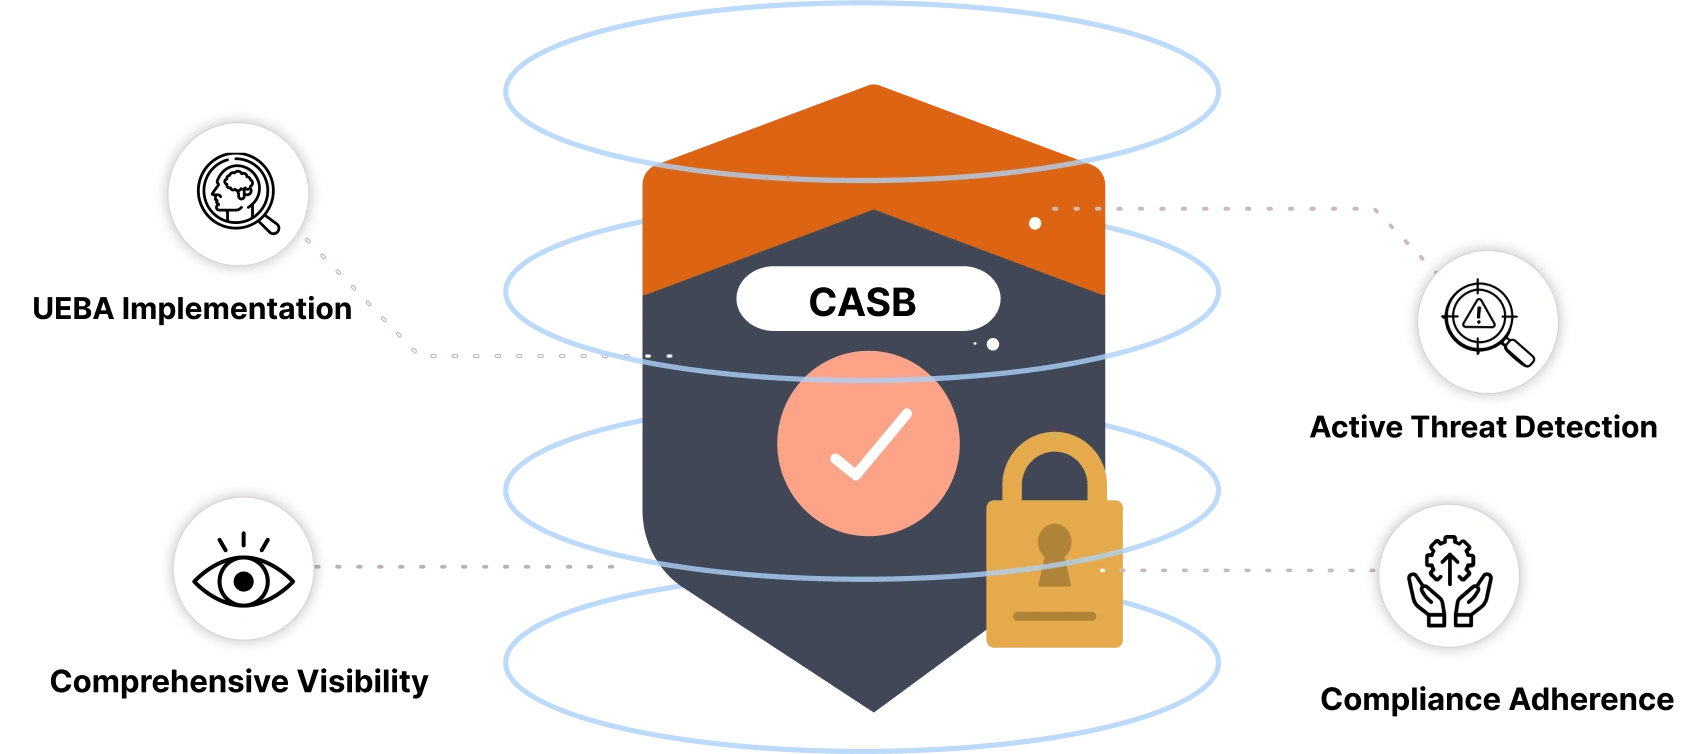 Best Practices of CASB for Corporate Network Security